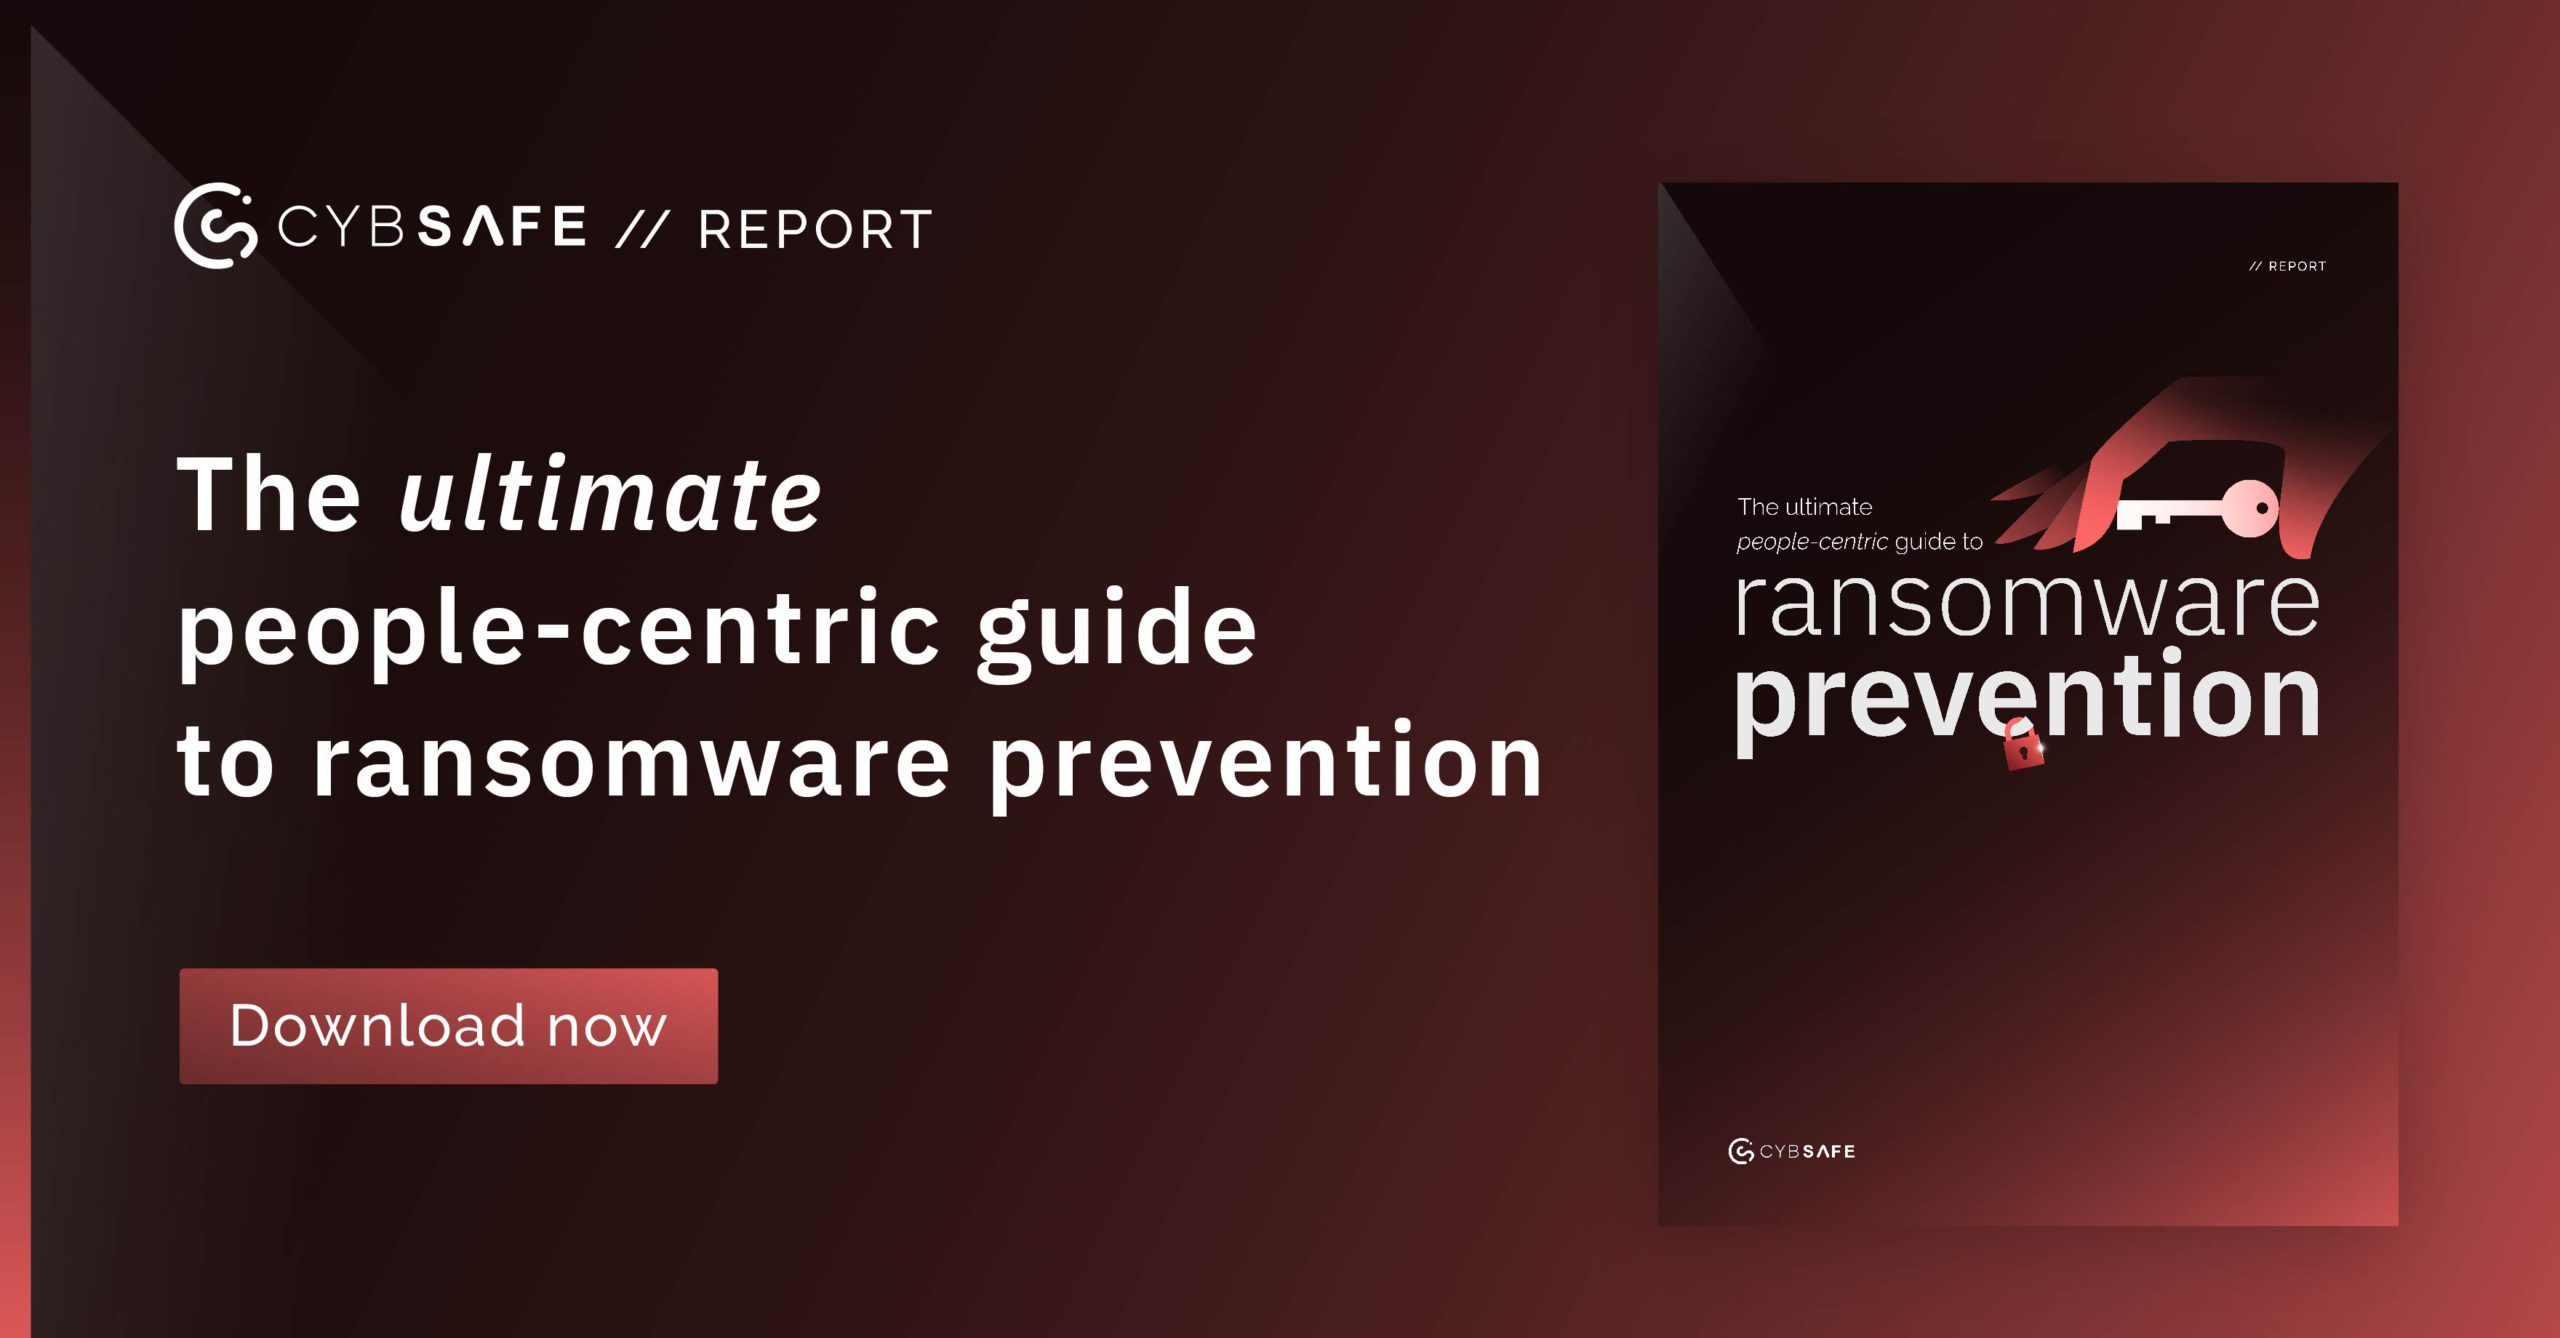 The ultimate people-centric guide to ransomware prevention